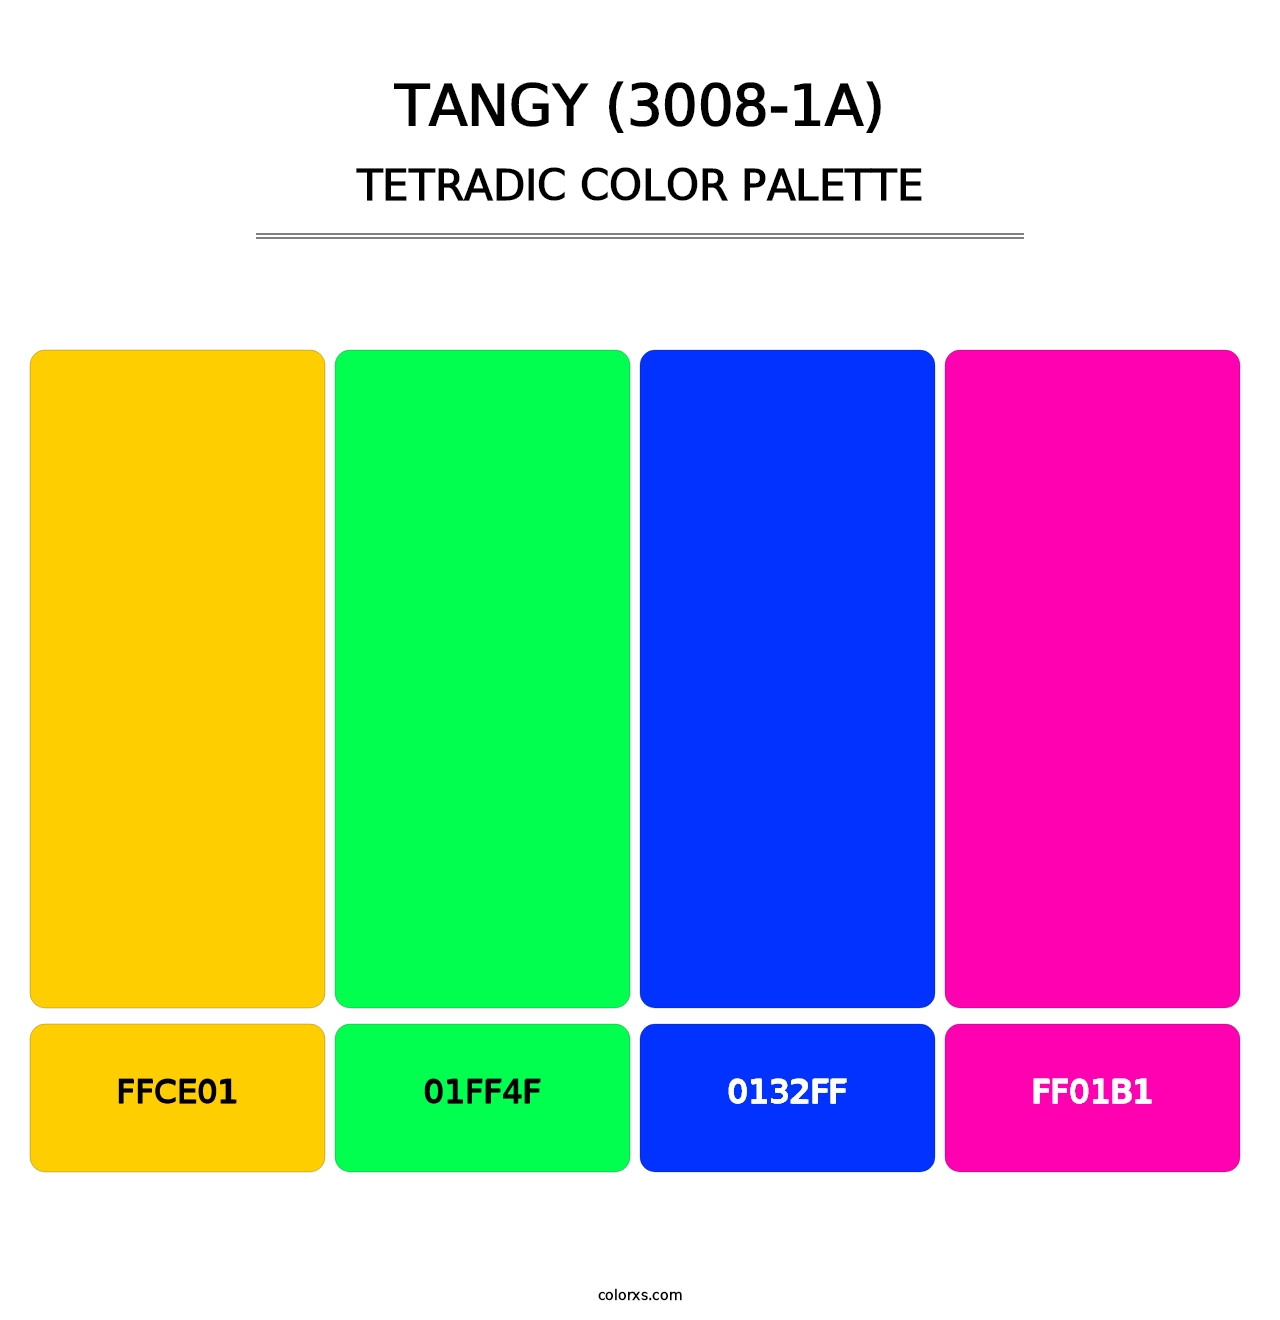 Tangy (3008-1A) - Tetradic Color Palette